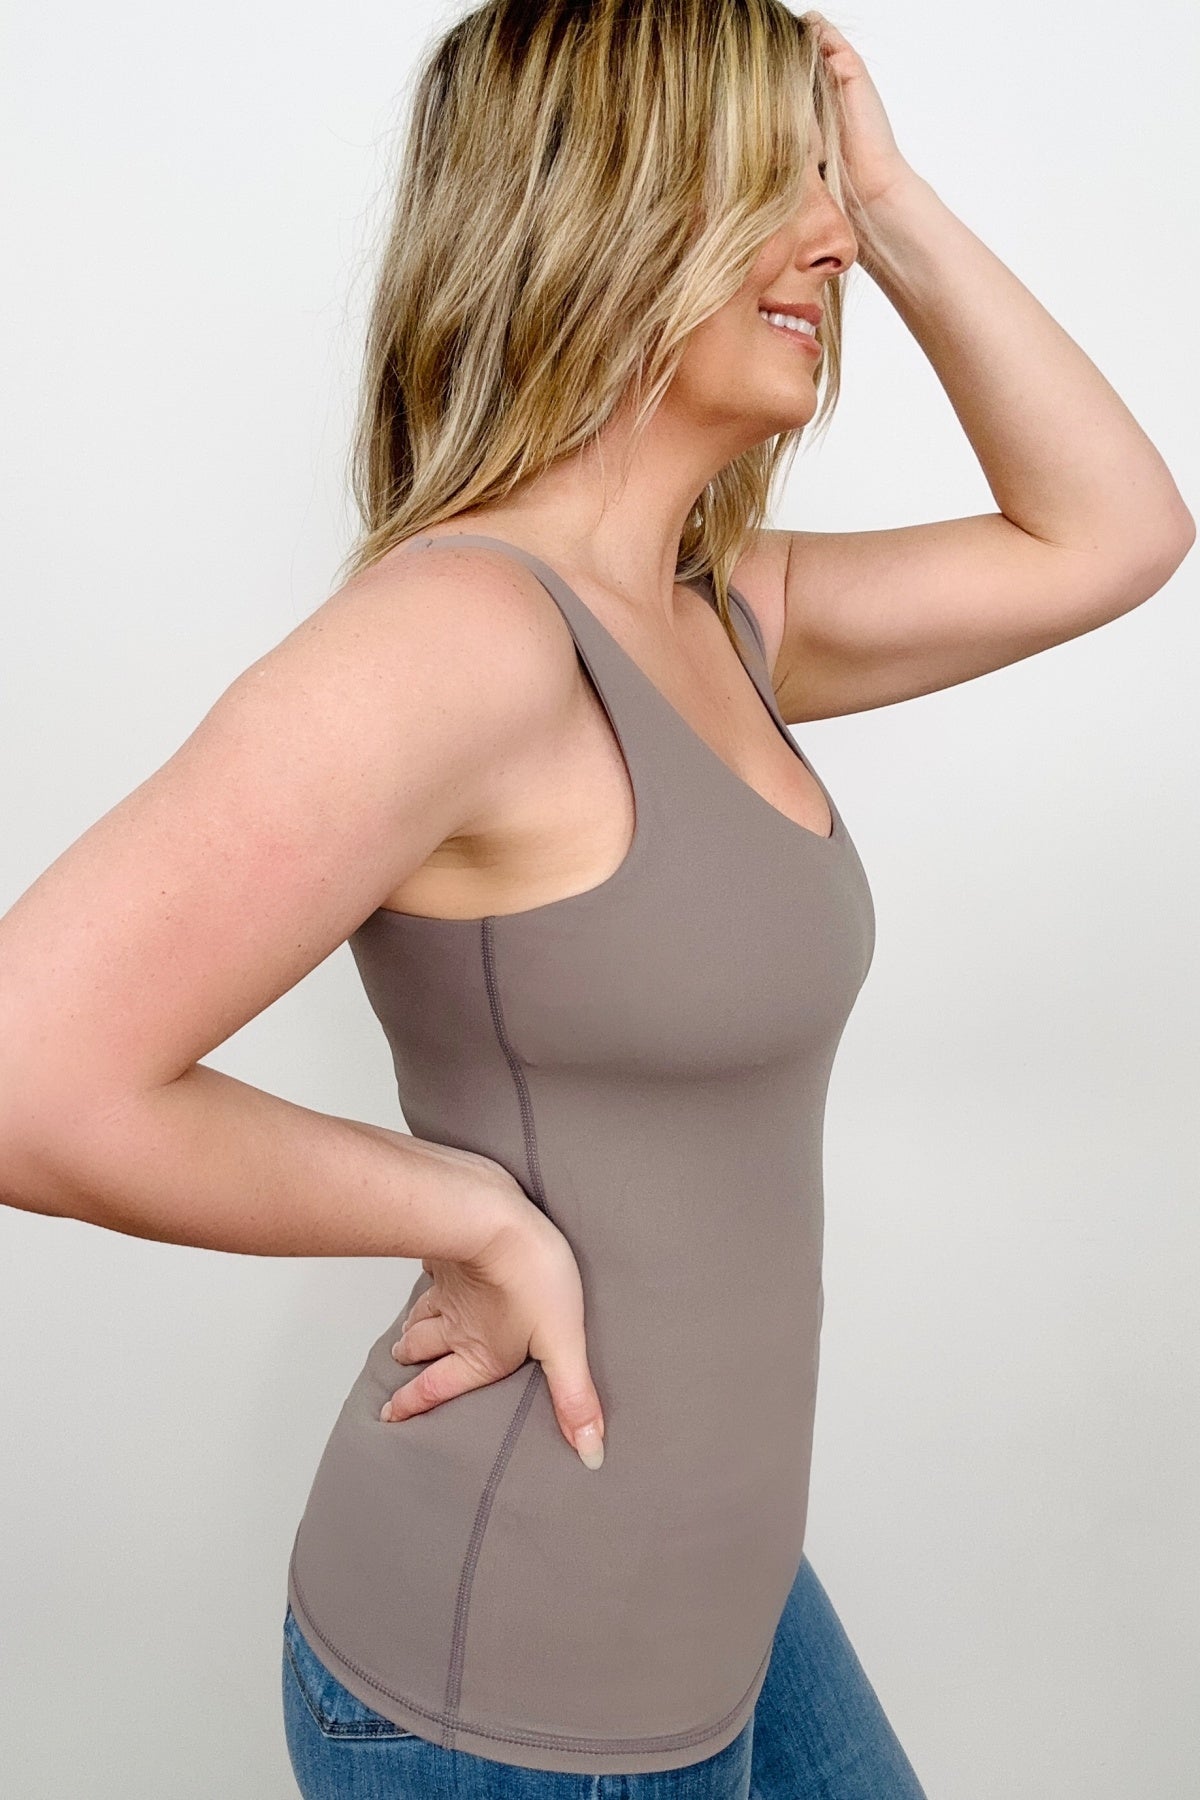 11 Colors - FawnFit Long Length Lift Tank 2.0 with Built-in Bra - Copper + Rose